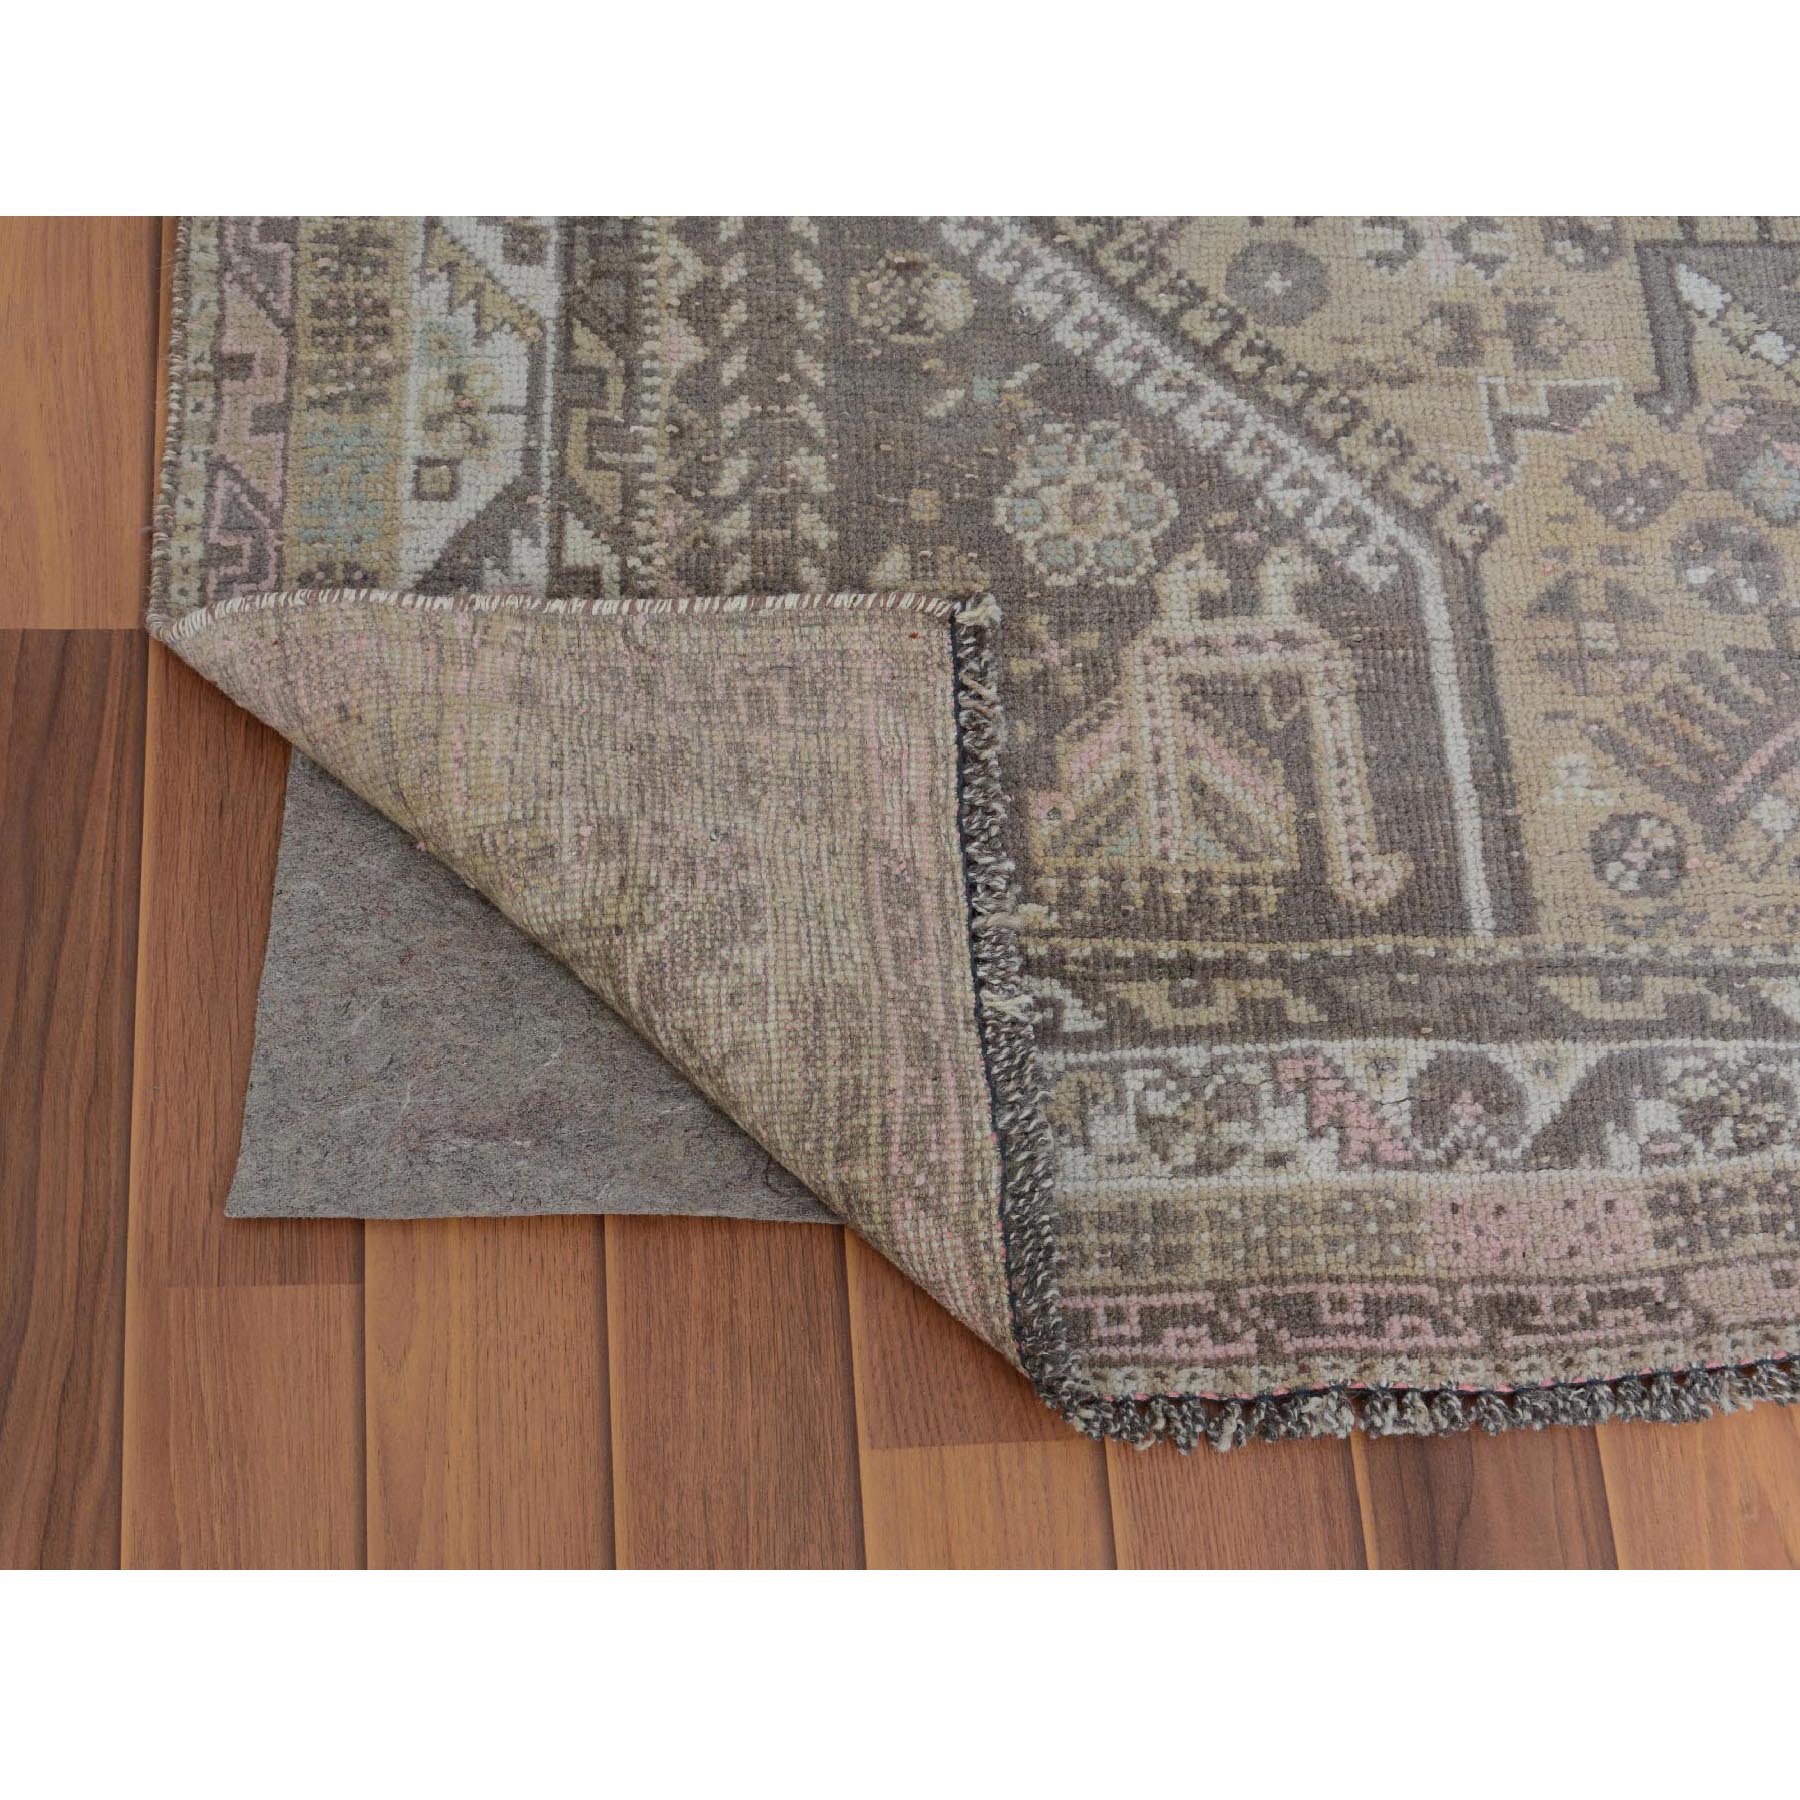 7-1 x9-10  Beige Vintage and Worn Down Persian Qashqai Pure Wool Hand Knotted Oriental Rug 